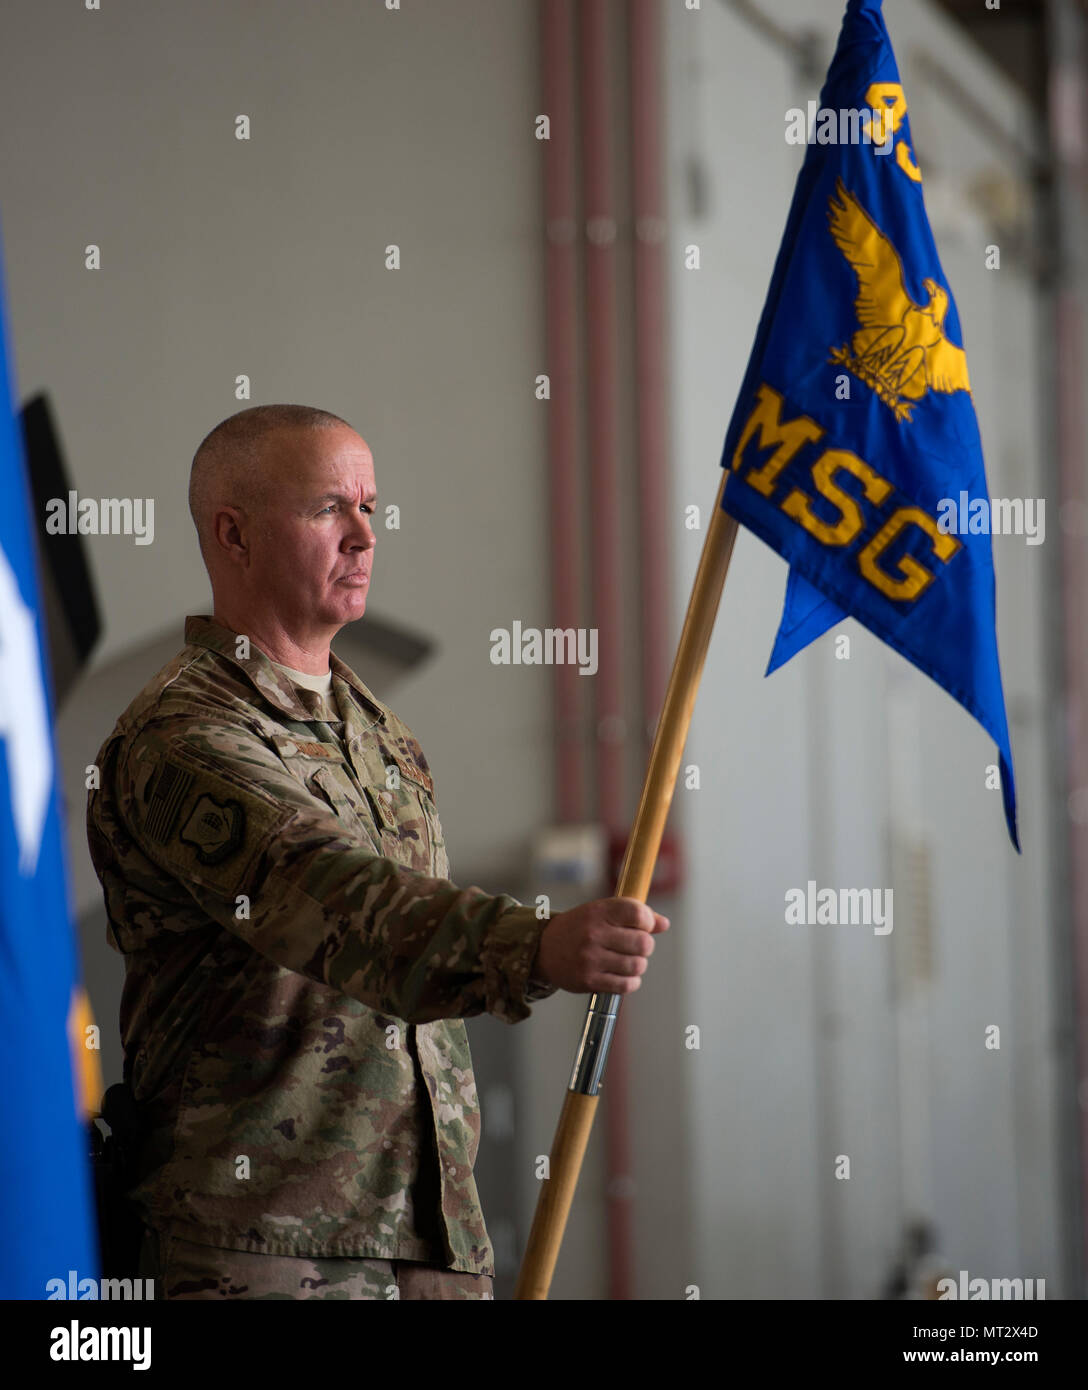 Chief Master Sgt. Michael Lemond, the 455th Expeditionary Mission Support Group superintendent, stands at parade rest during the 455th EMSG change of command ceremony at Bagram Airfield, Afghanistan, July 20, 2017. Lemond is deployed out of Barksdale Air Force Base, Louisiana, where he serves as the 2nd MSG superintendent. (U.S. Air Force photo by Staff Sgt. Benjamin Gonsier) Stock Photo